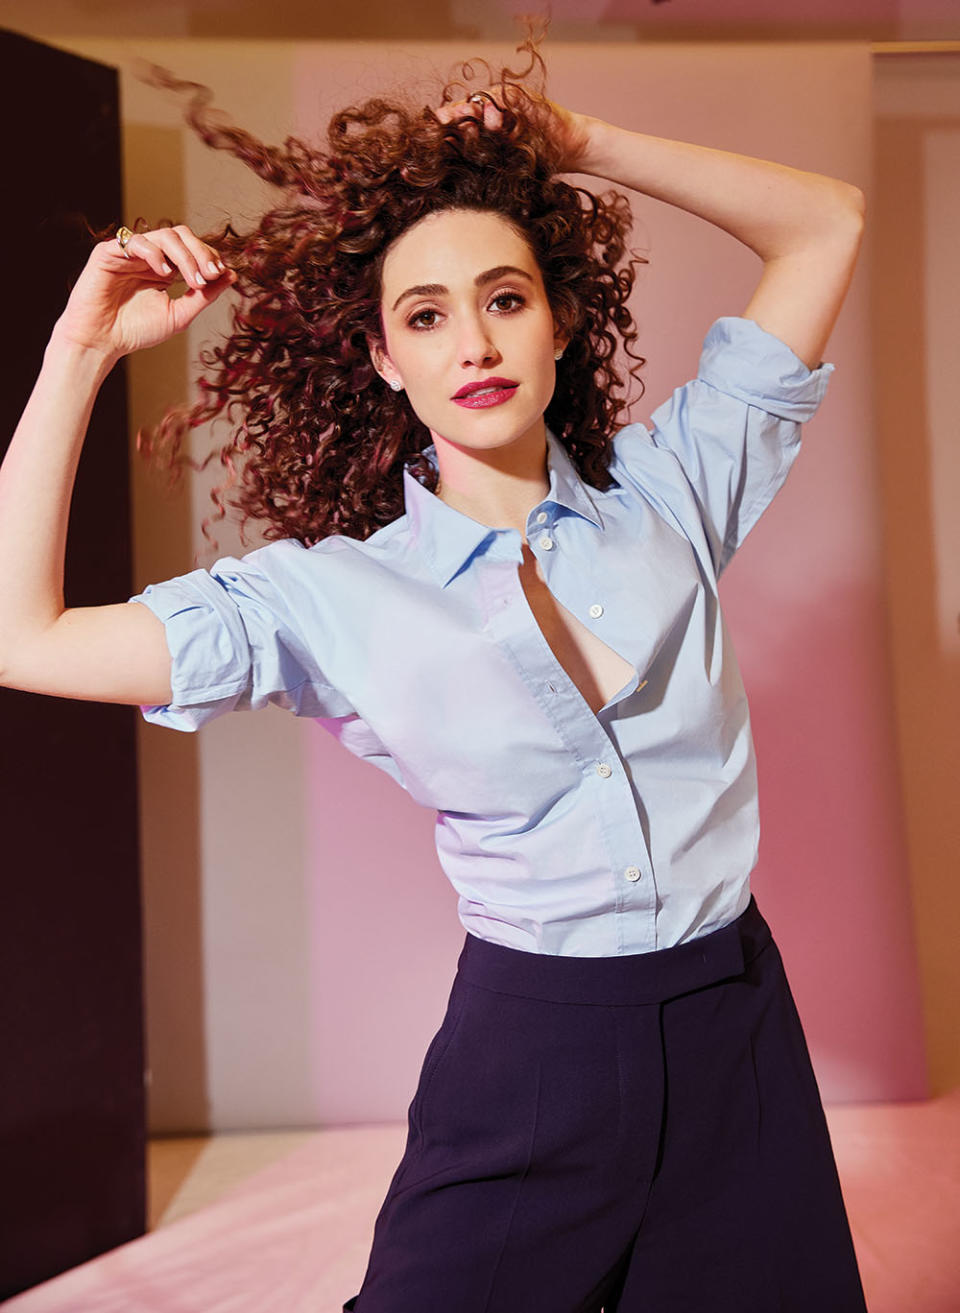 “She’s the original influencer,” says Emmy Rossum of Angelyne, whom she portrays in a new limited series on Peacock. “She was doing this before anybody. She knew the power of her image.” Rossum was photographed April 15 at PMC Studios in New York. - Credit: Photographed by Jenna Greene